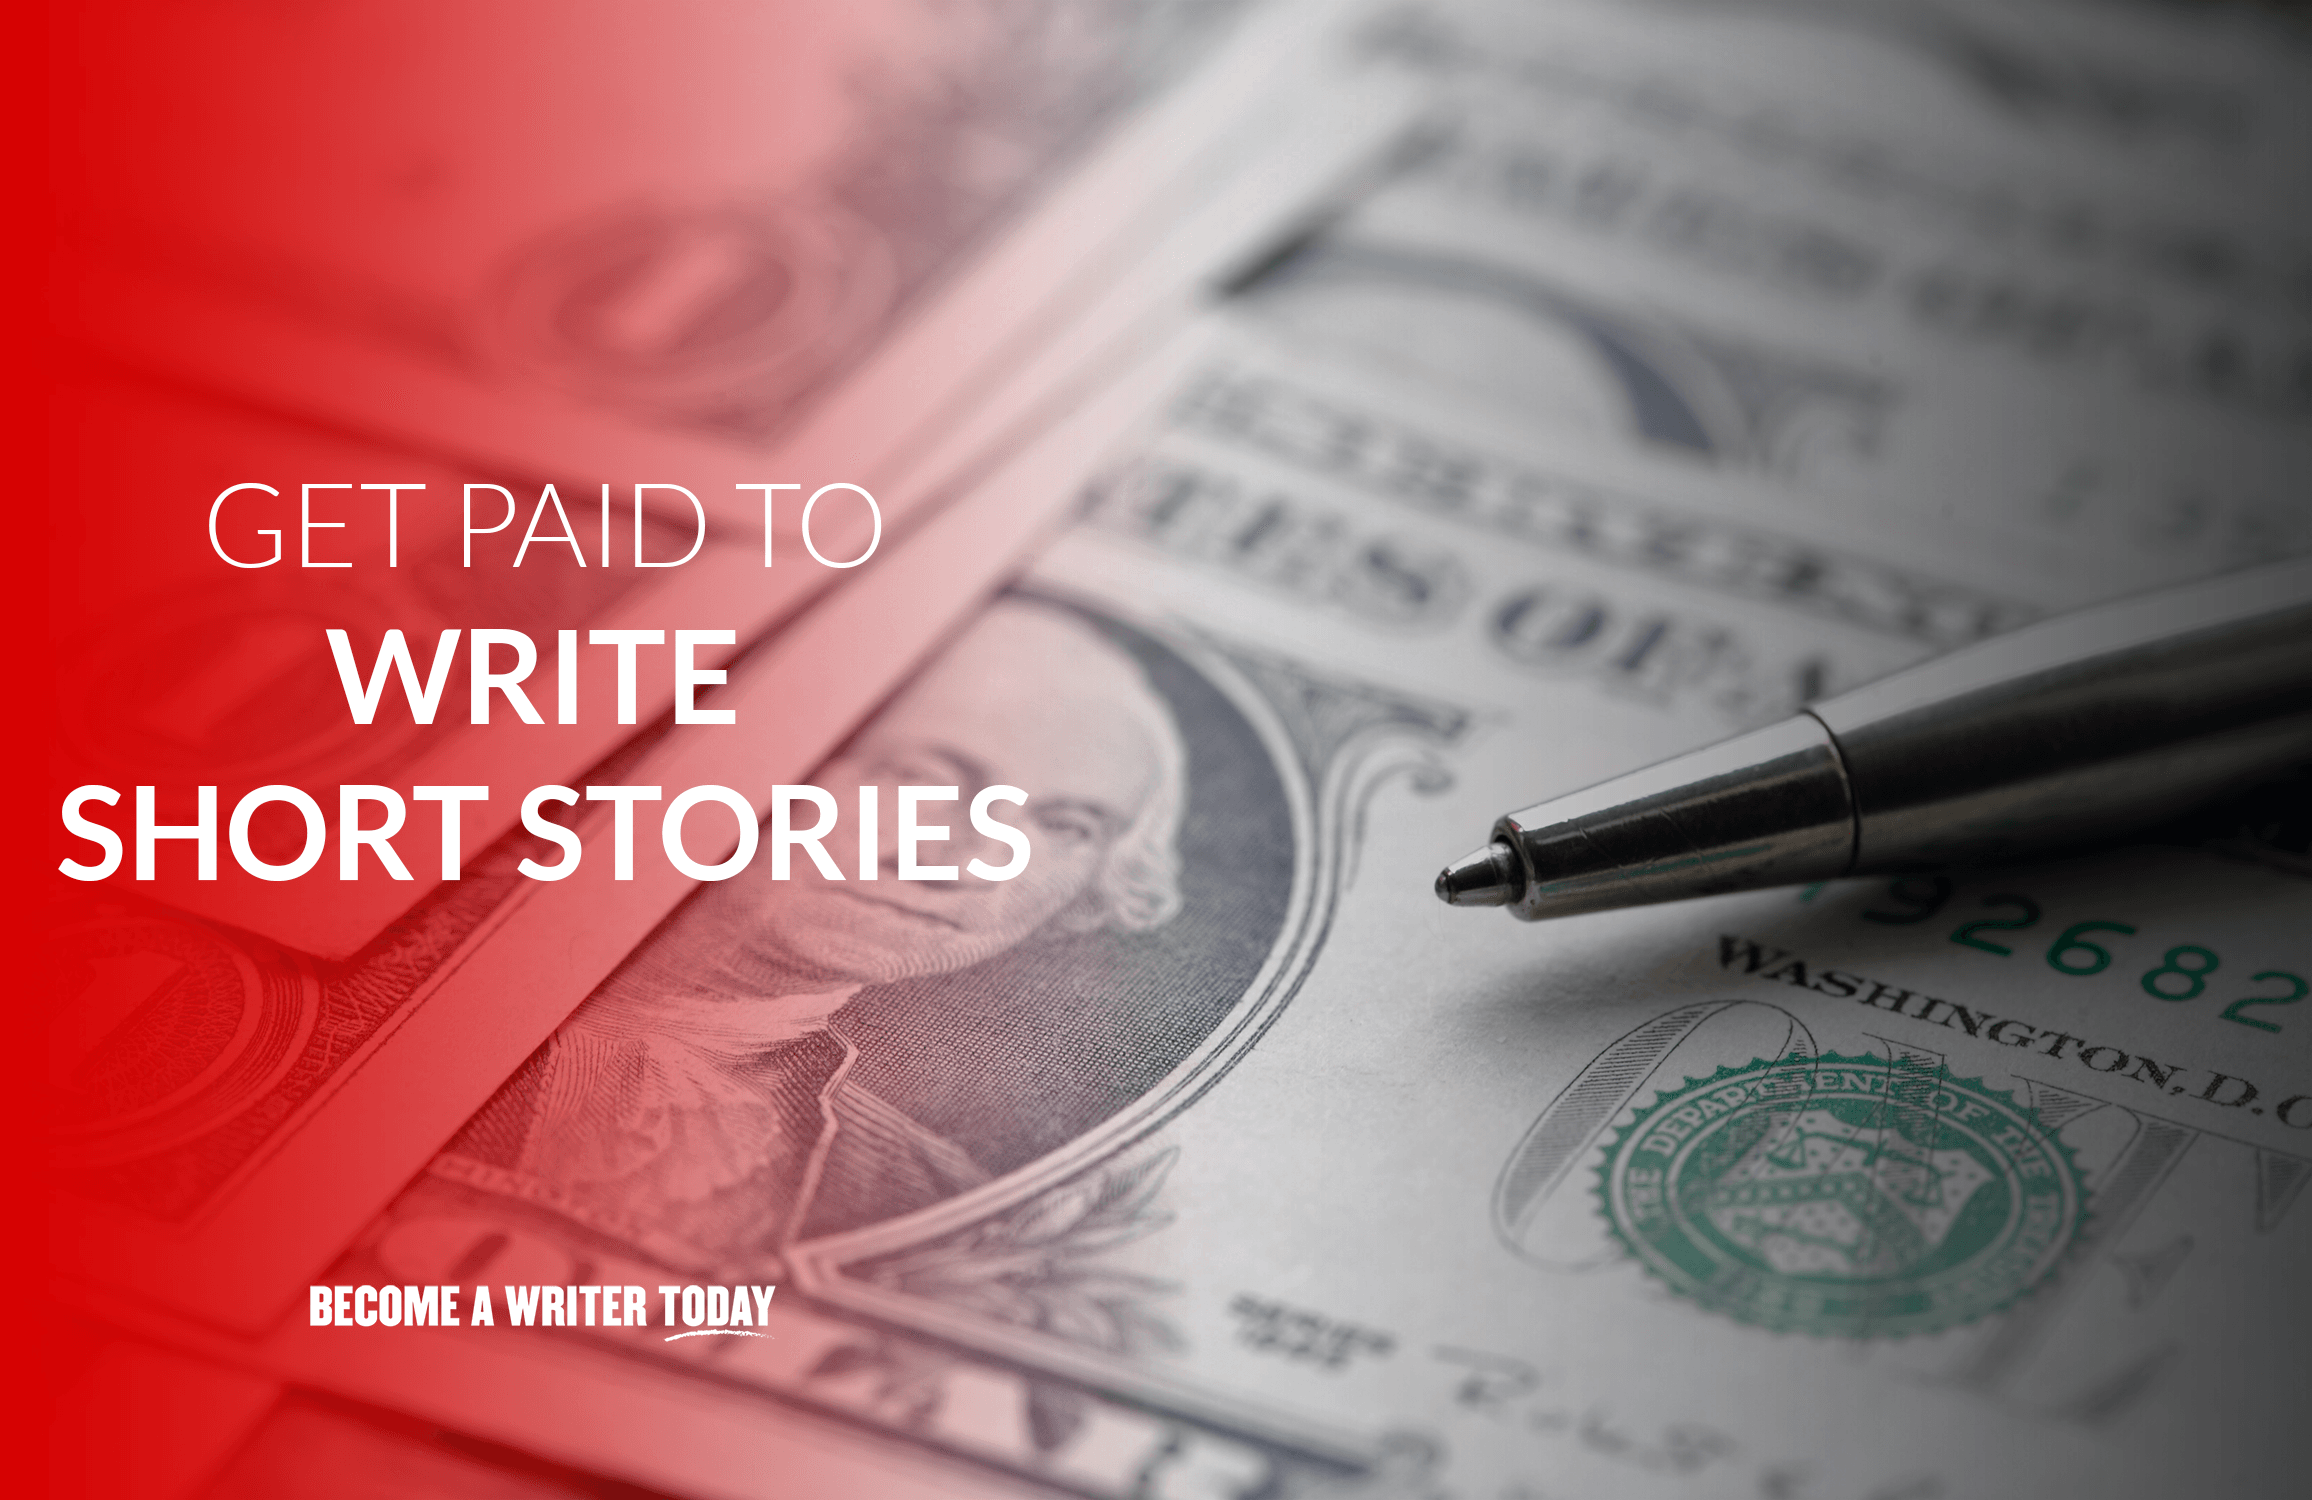 How To Get Paid To Write Short Stories: 8 Great Options